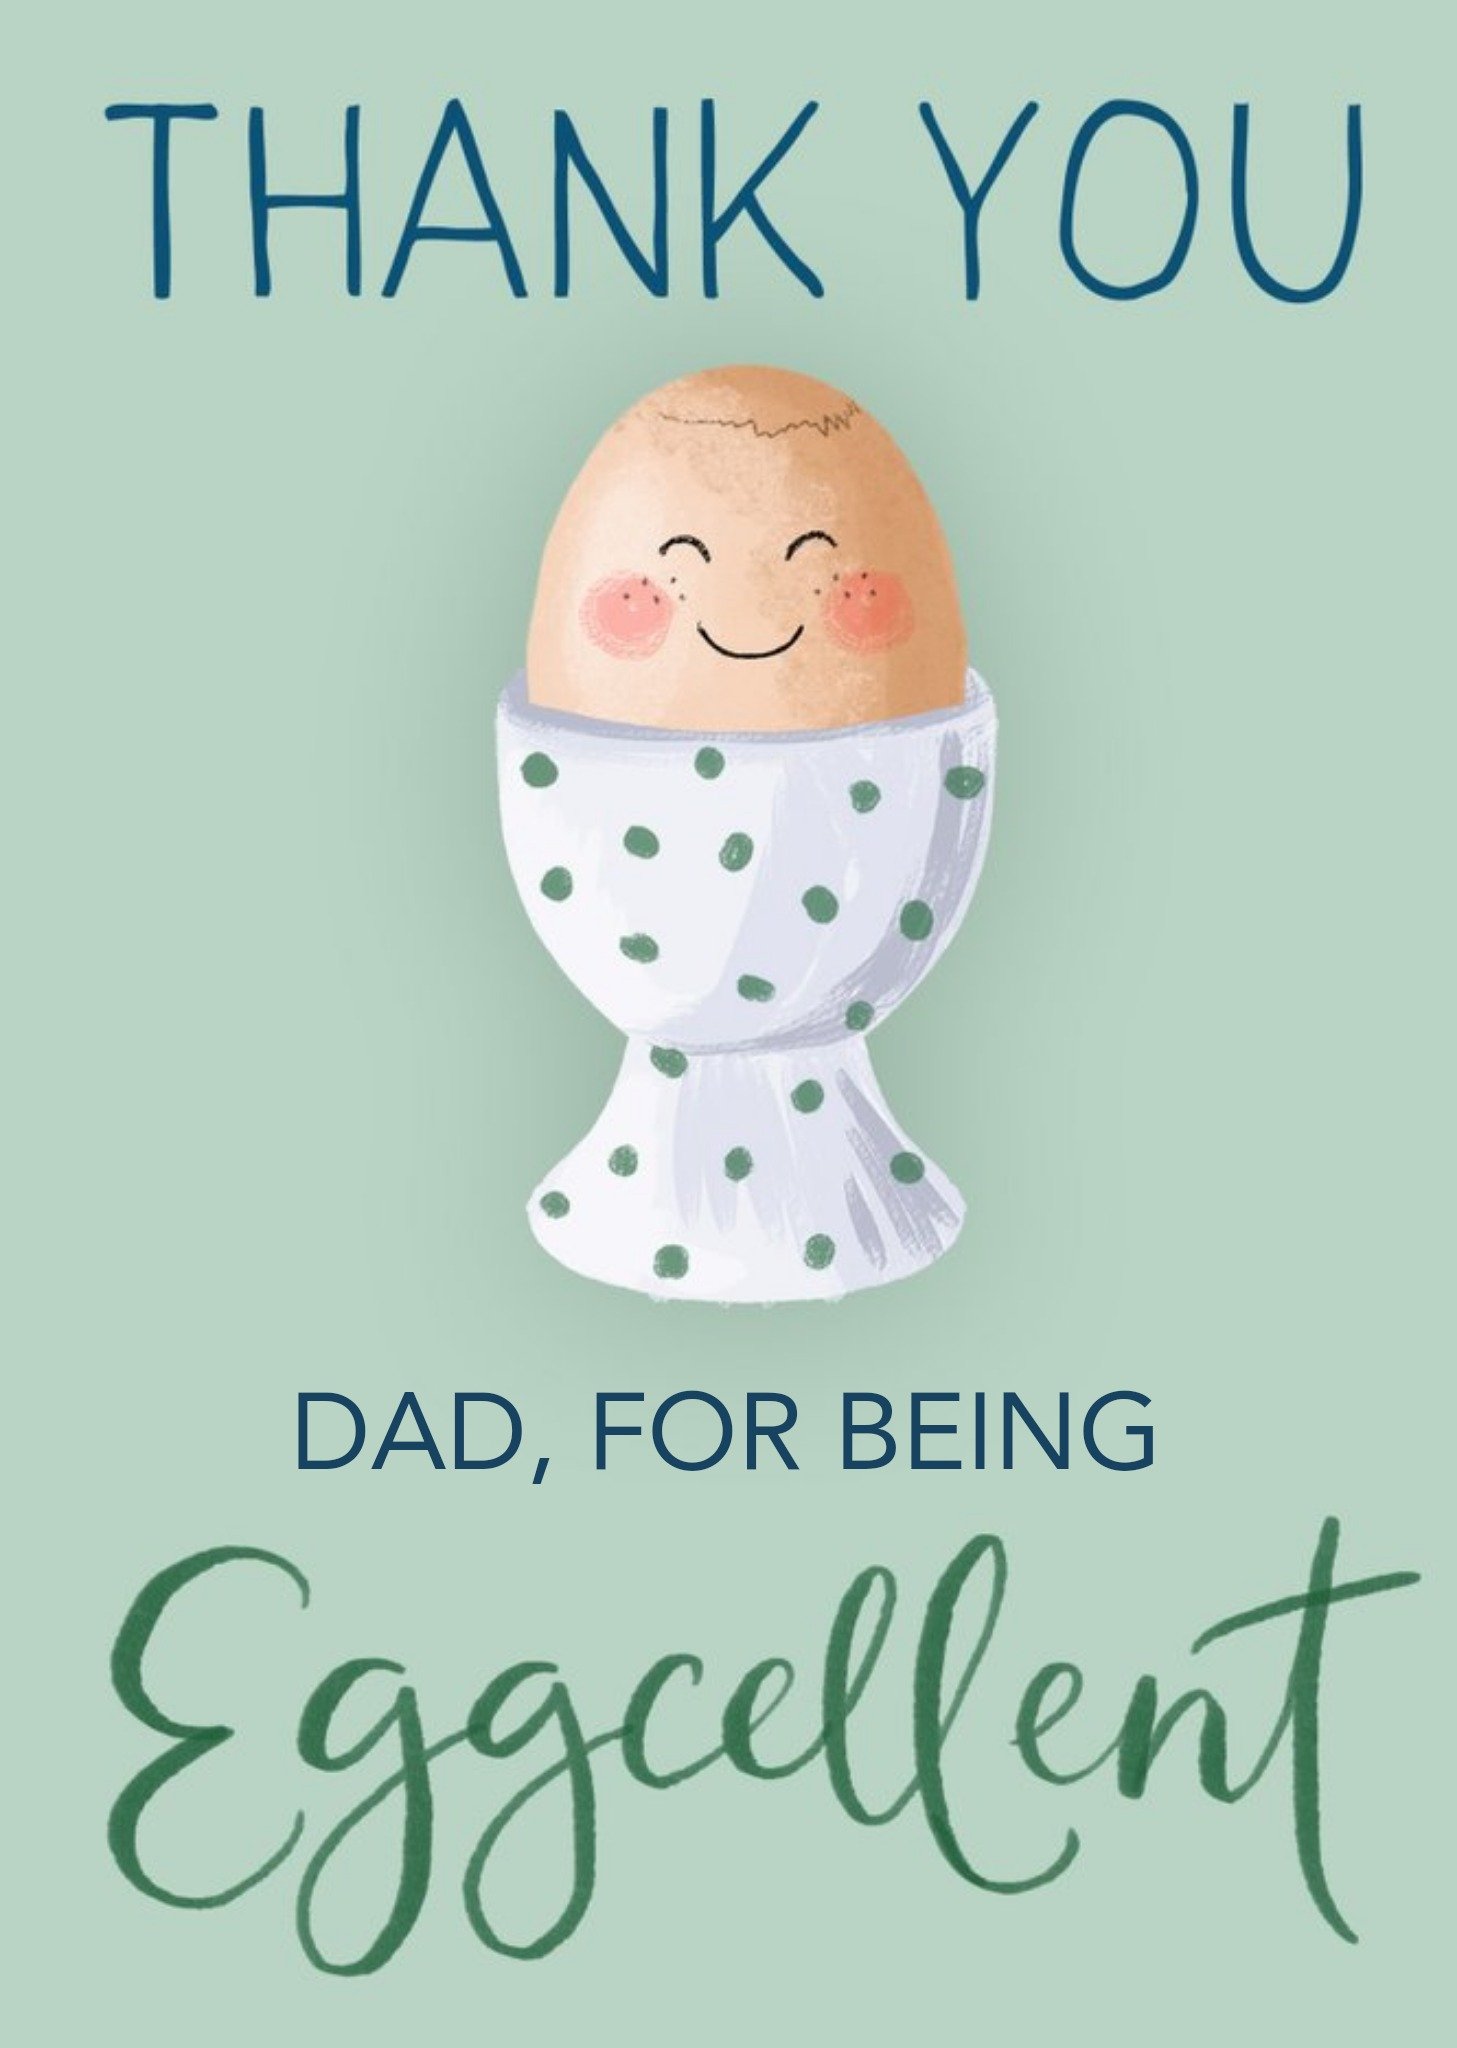 Okey Dokey Design Illustration Of An Egg In An Egg Cup On A Green Background Thank You Dad Card, Lar